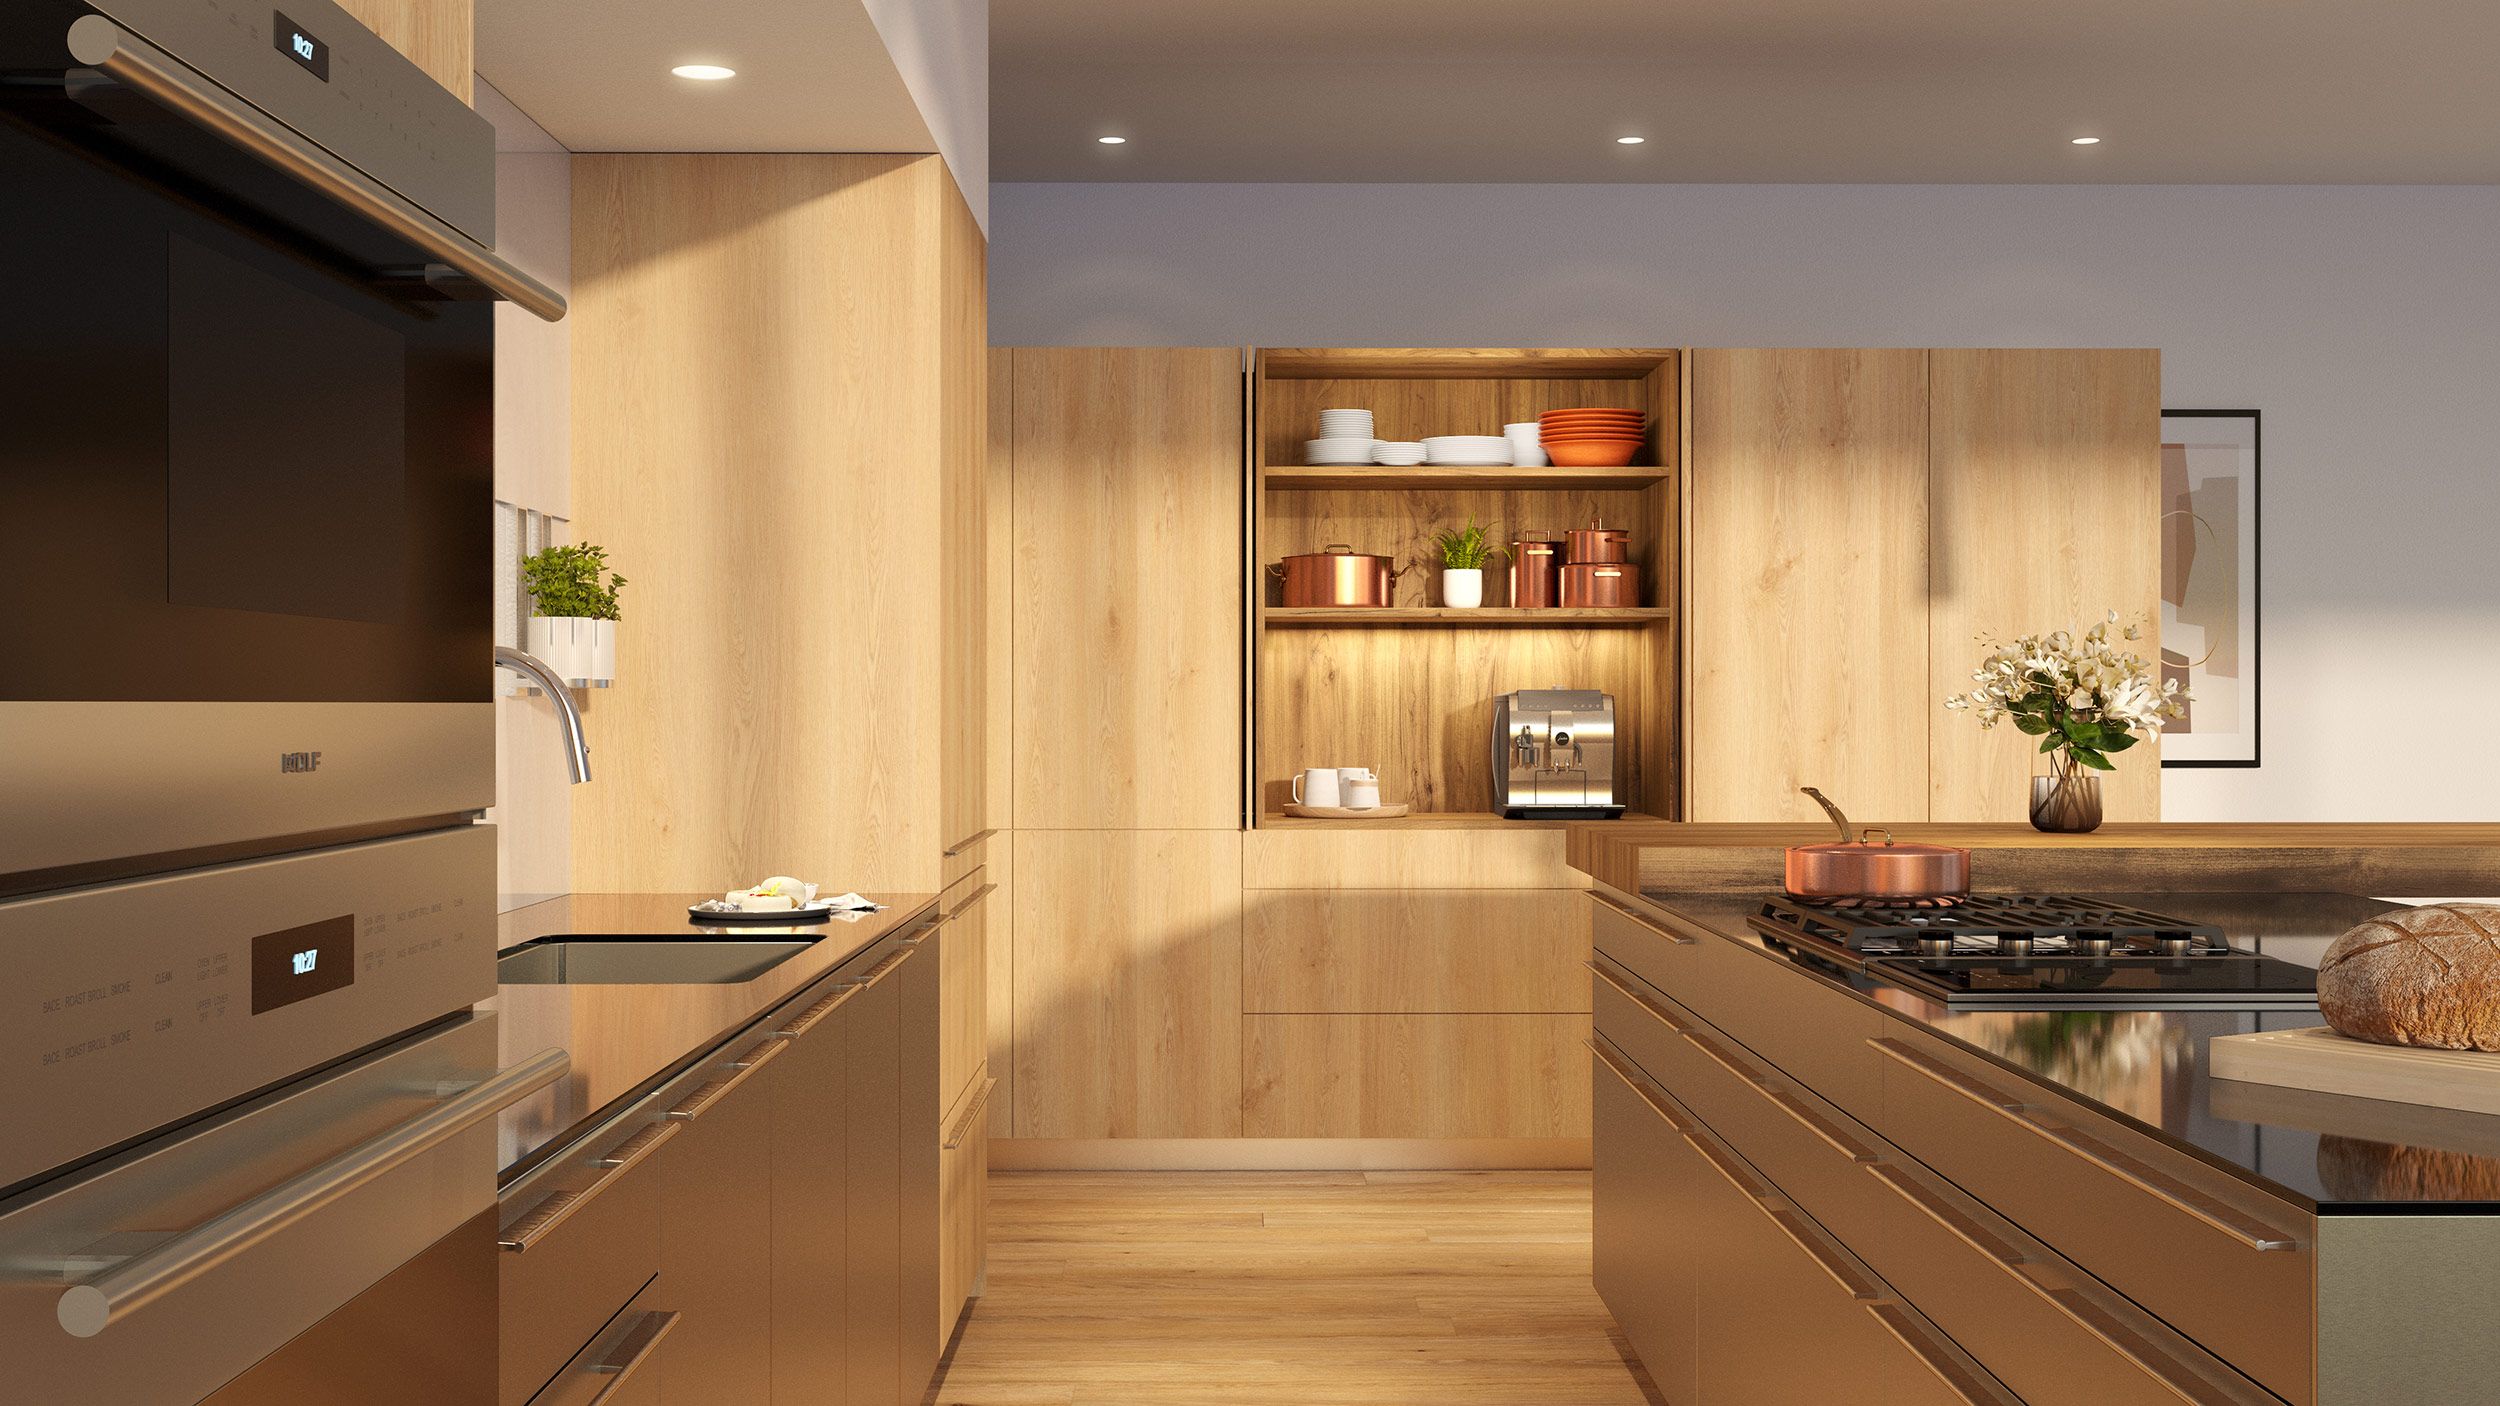 Kitchen designs for people who appreciate unparalleled quality.